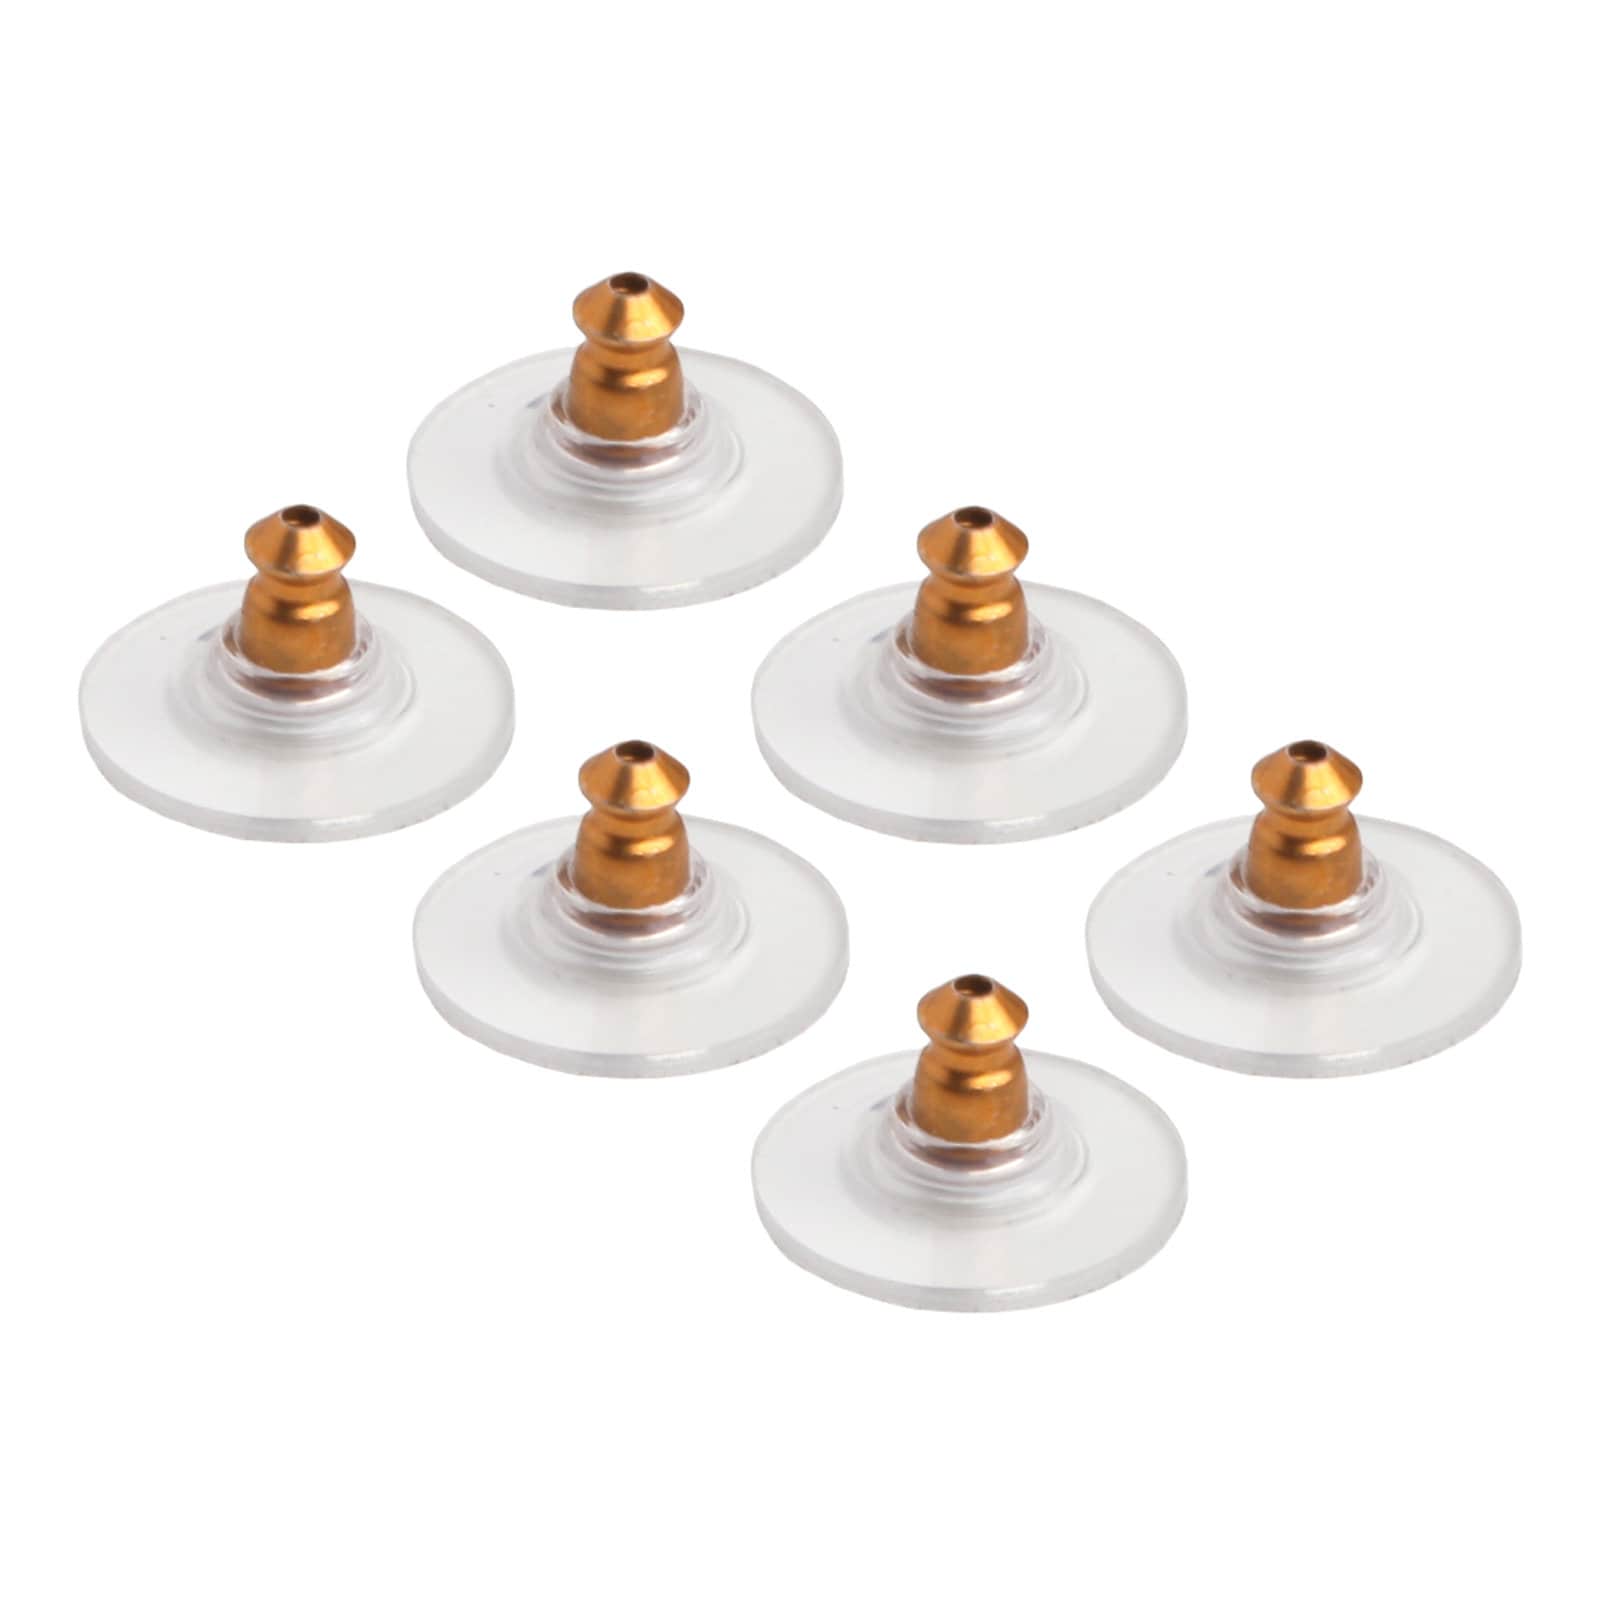 100, 500 or 1,000 BULK Clear Silicone Rubber Earring Backs